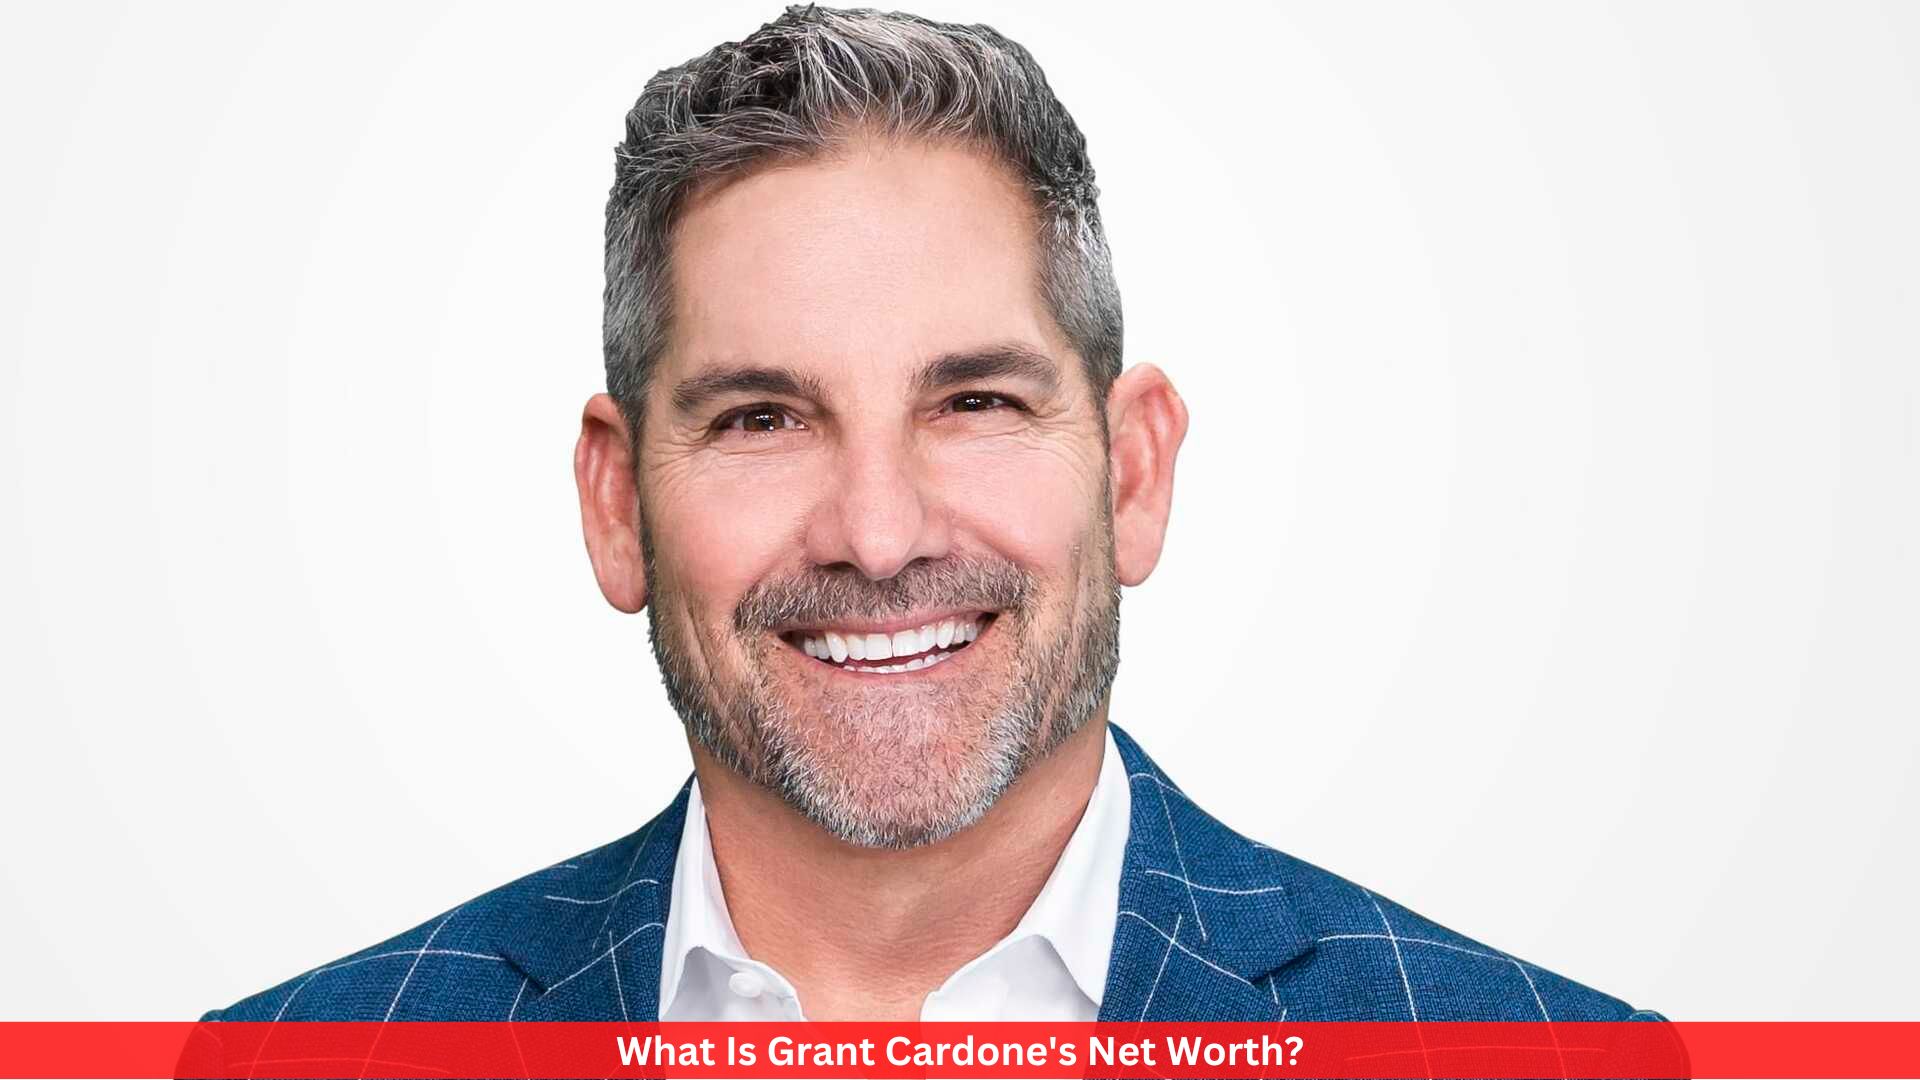 What Is Grant Cardone's Net Worth?